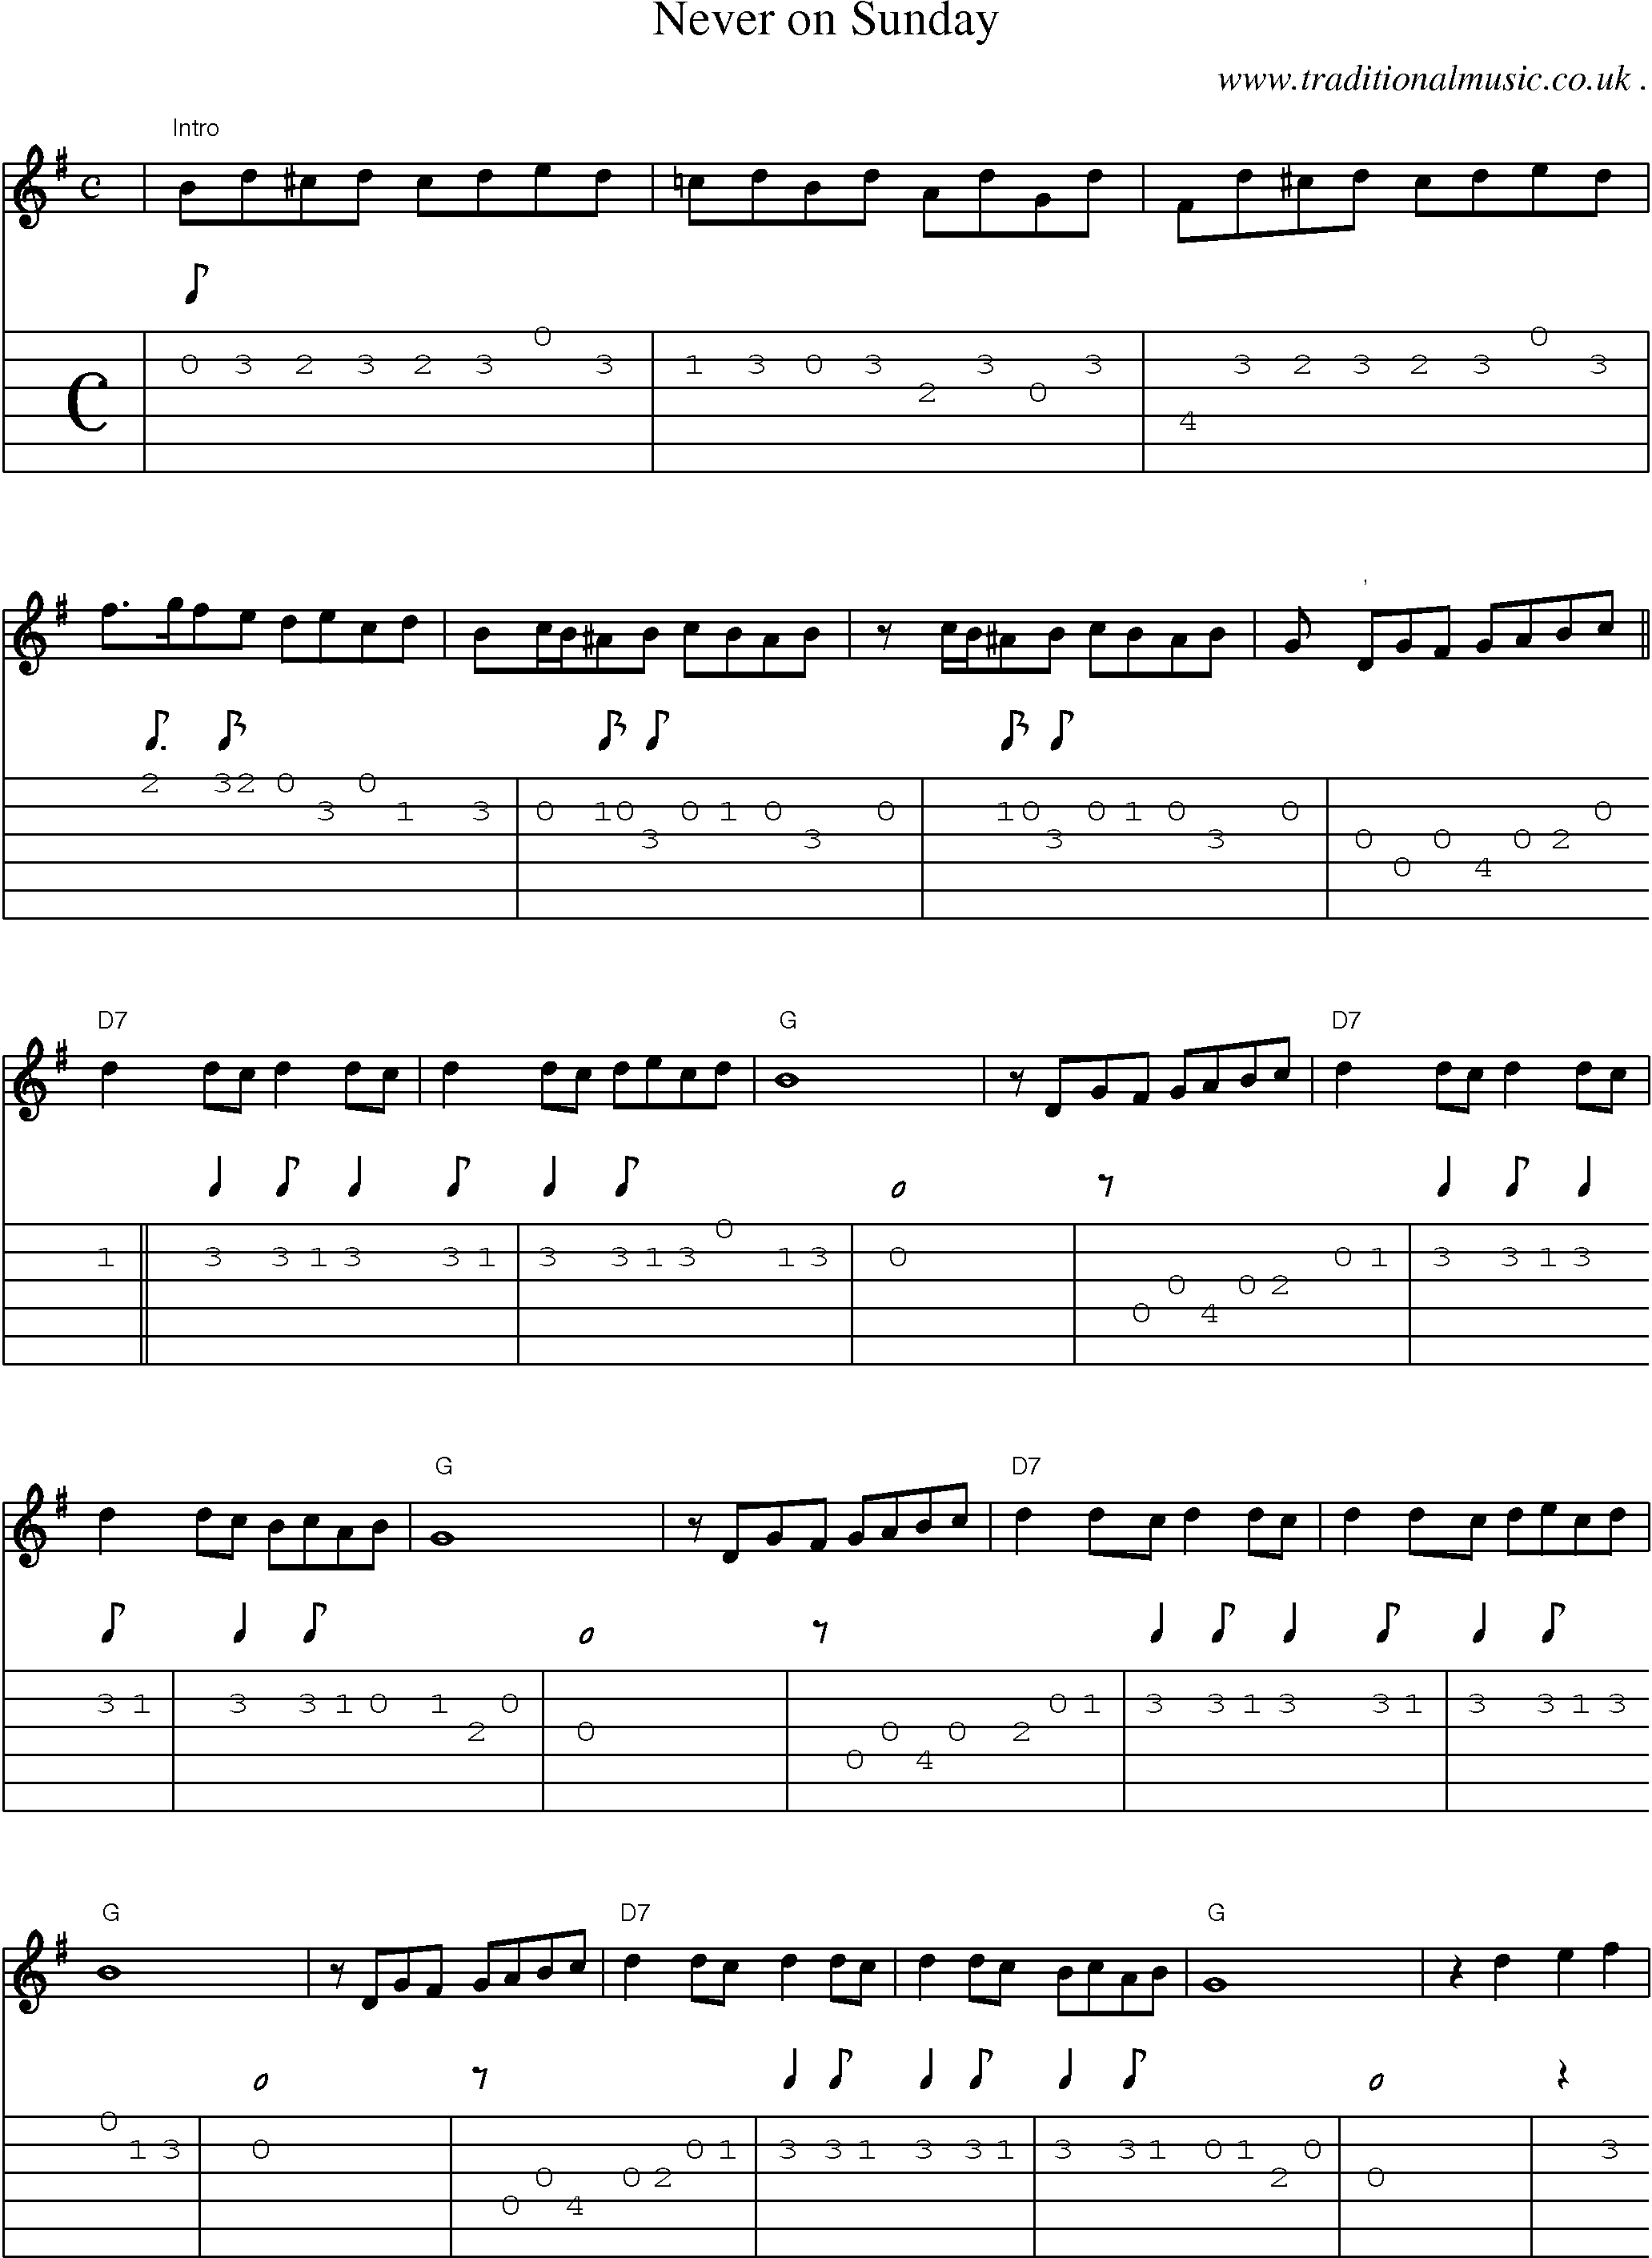 Sheet-music  score, Chords and Guitar Tabs for Never On Sunday